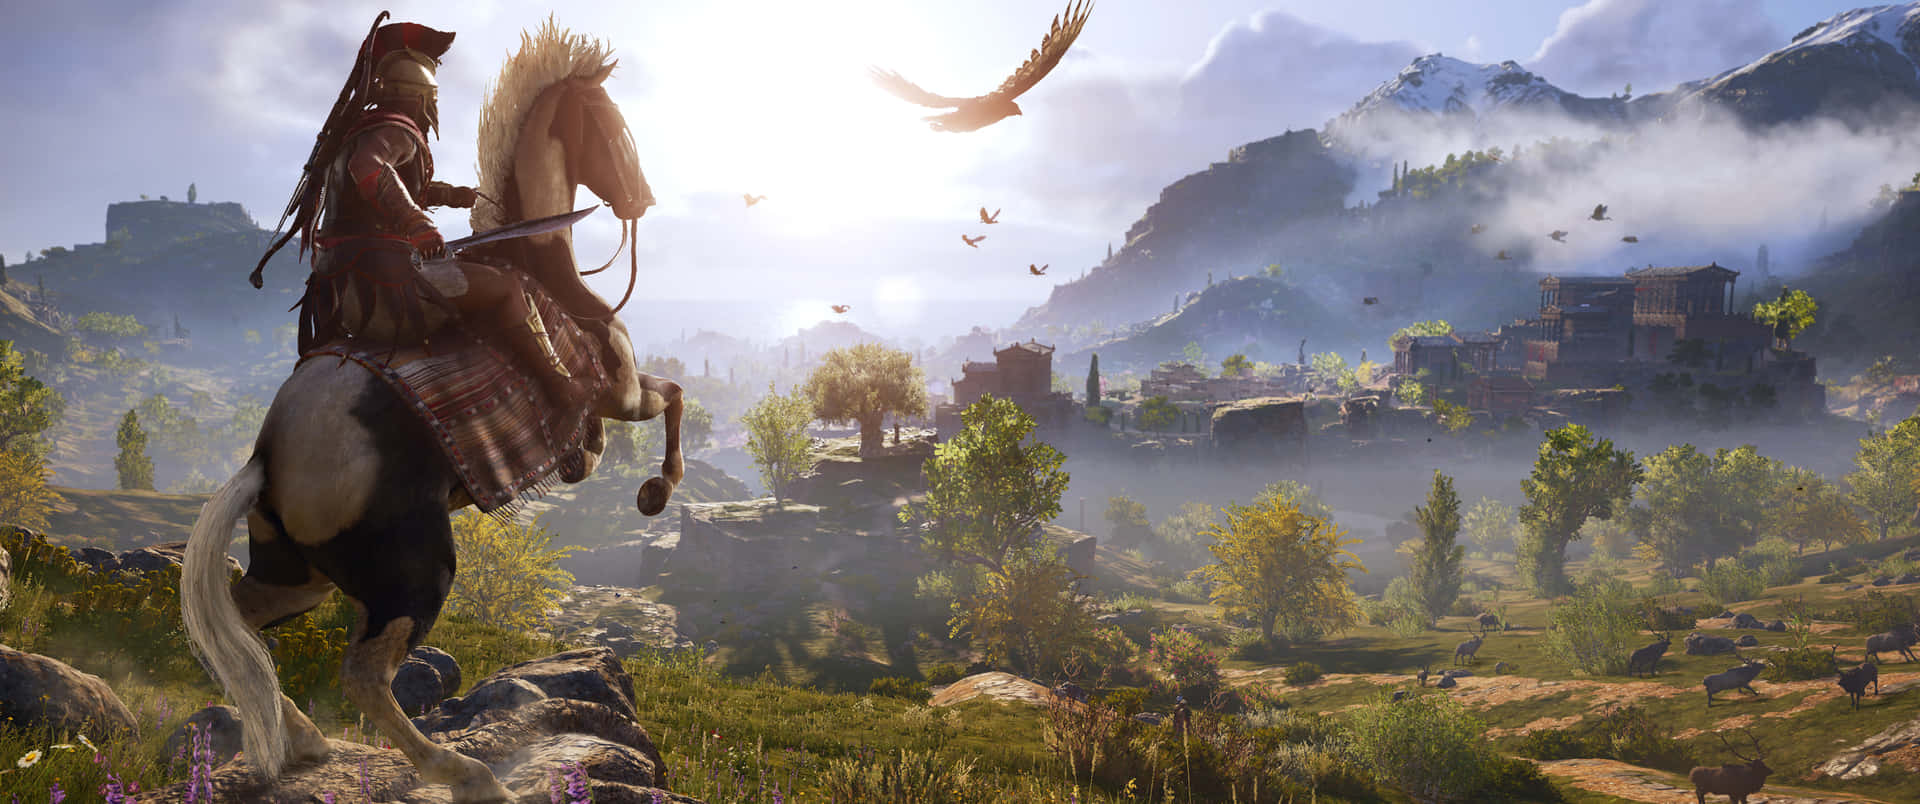 3440x1440p Assassin's Creed Odyssey Background Assassin Riding A Horse Background